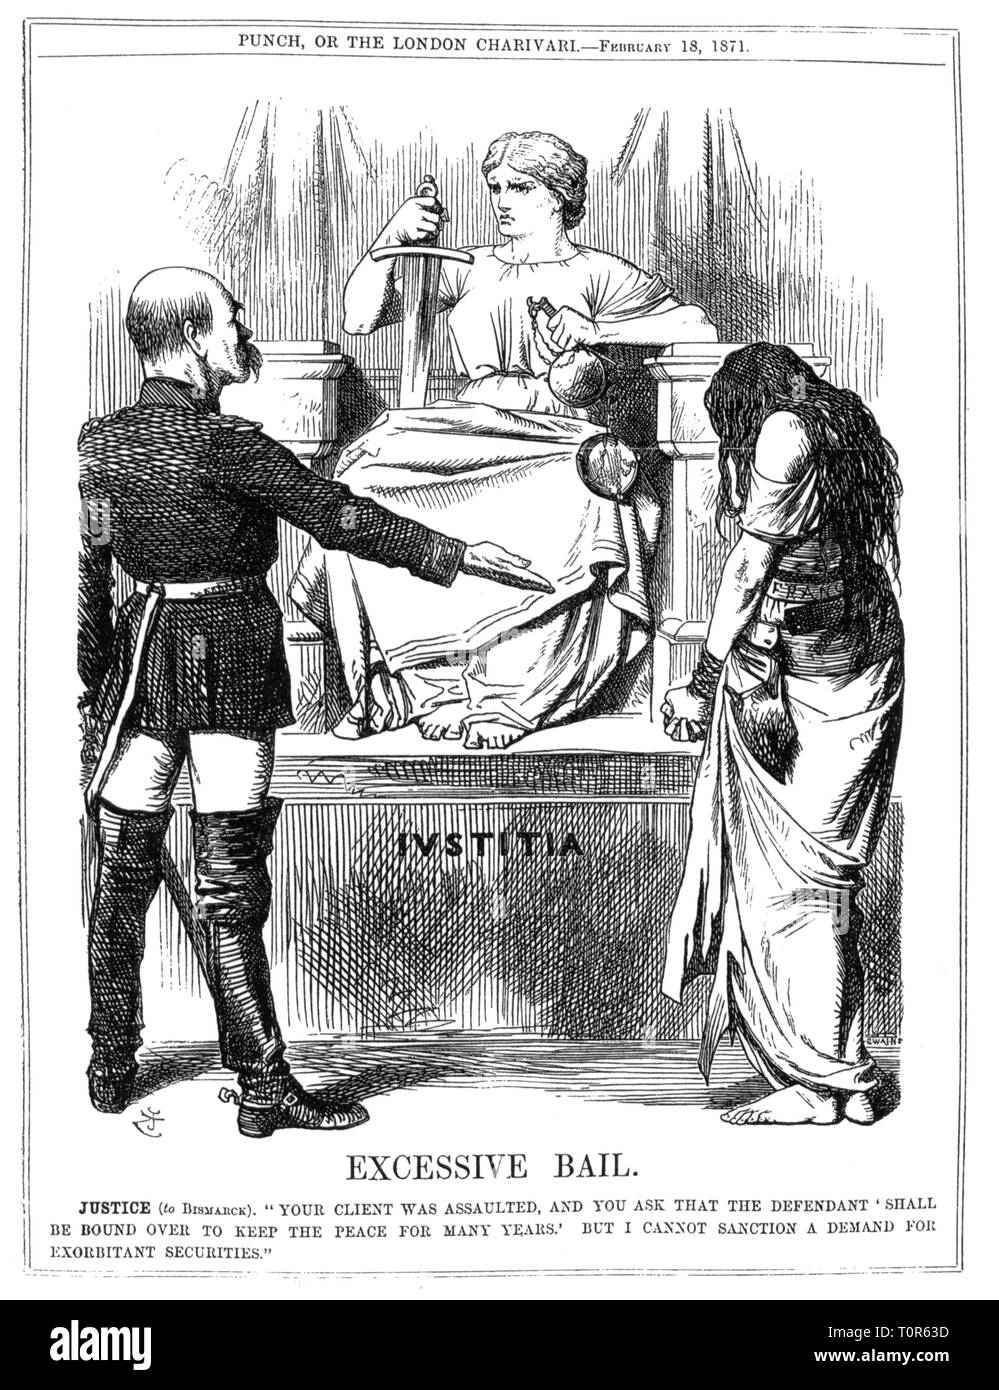 Franco-Prussian War 1870 - 1871, caricature, Otto von Bismarck and the enchained France in front of the British Lady Justice, 'Excessive Bail', drawing by John Tenniel, 'Punch', London, 18.2.1871, satire, caricature, caricatures, cartoon, cartoons, British press, Great Britain, United Kingdom, German - French, Prime Minister of the North German confederation, Germany, people, claim, demands, security demand, negotiations, treaty of Versailles, chains, chain, captivated, justice, 19th century, historic, historical, Additional-Rights-Clearance-Info-Not-Available Stock Photo